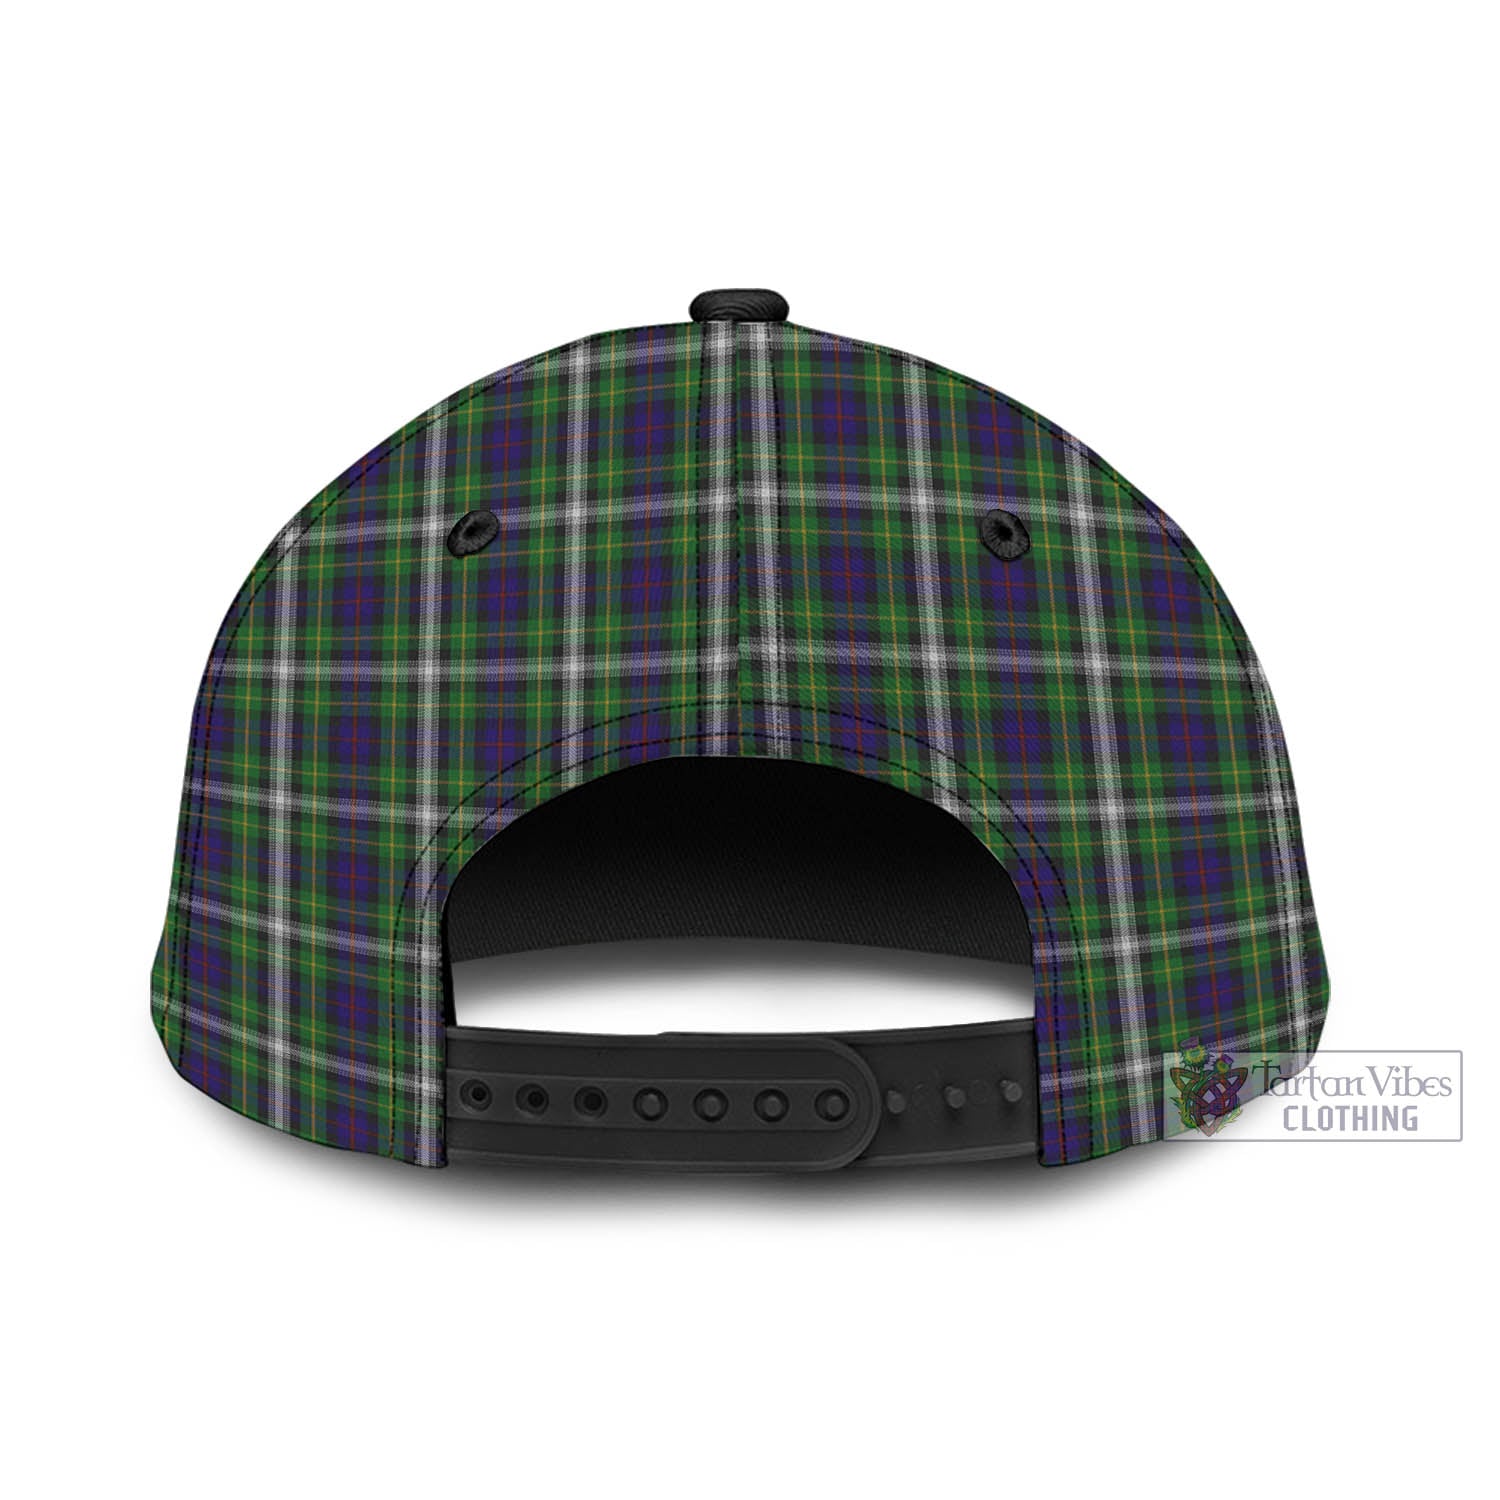 Tartan Vibes Clothing Farquharson Dress Tartan Classic Cap with Family Crest In Me Style